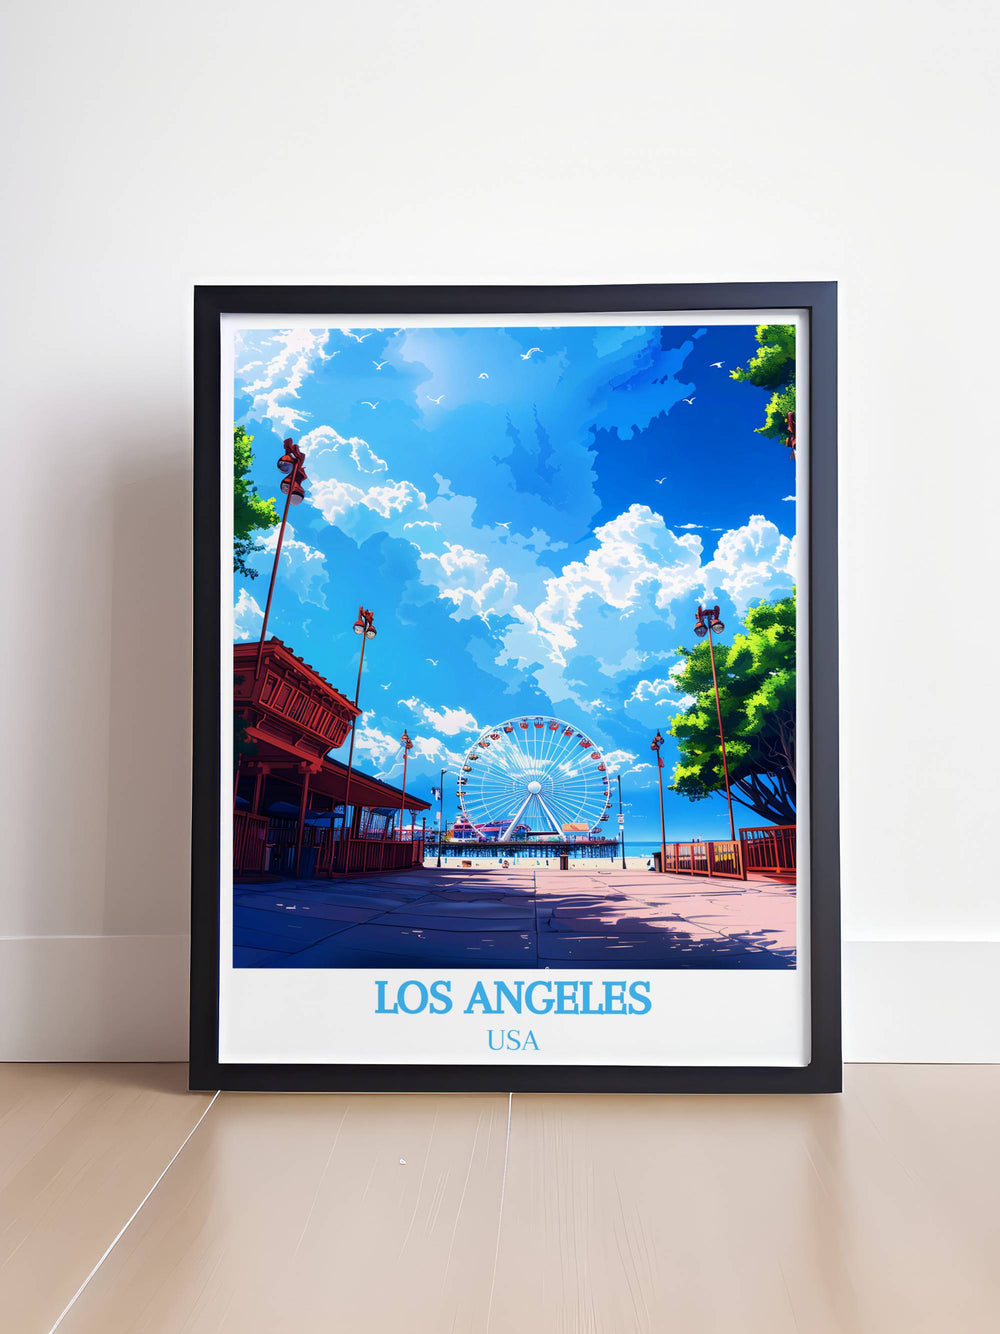 Vintage poster of Santa Monica Pier, ideal for adding a touch of retro style to your living space.